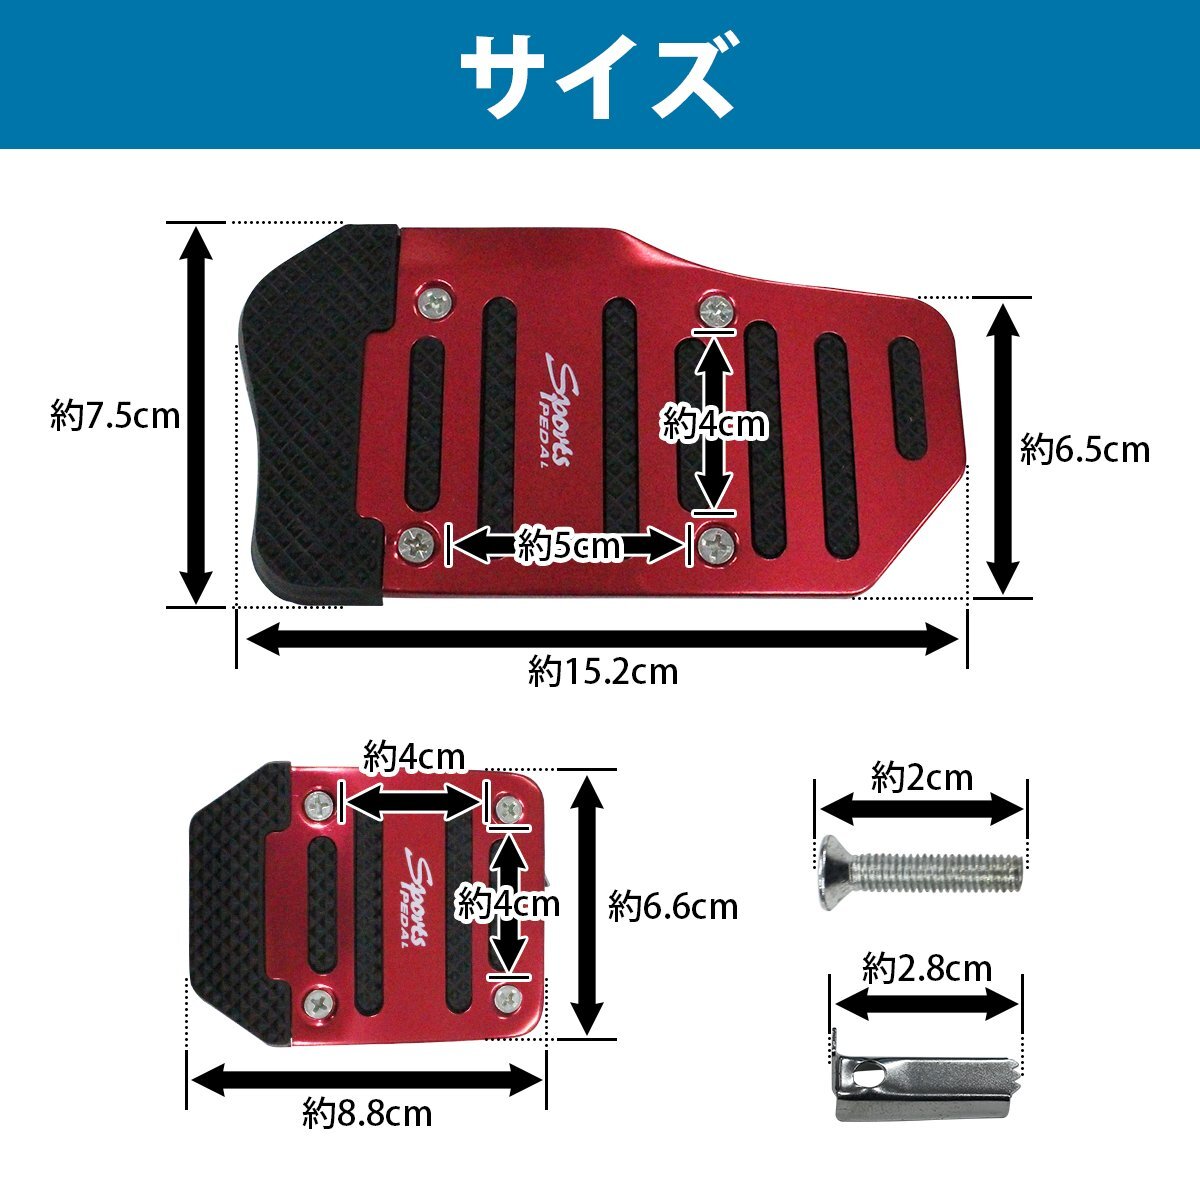 [ new goods immediate payment ] foot pedal plate [ manual car /MT for ] accelerator brake clutch aluminum pedal cover red red foot cover 